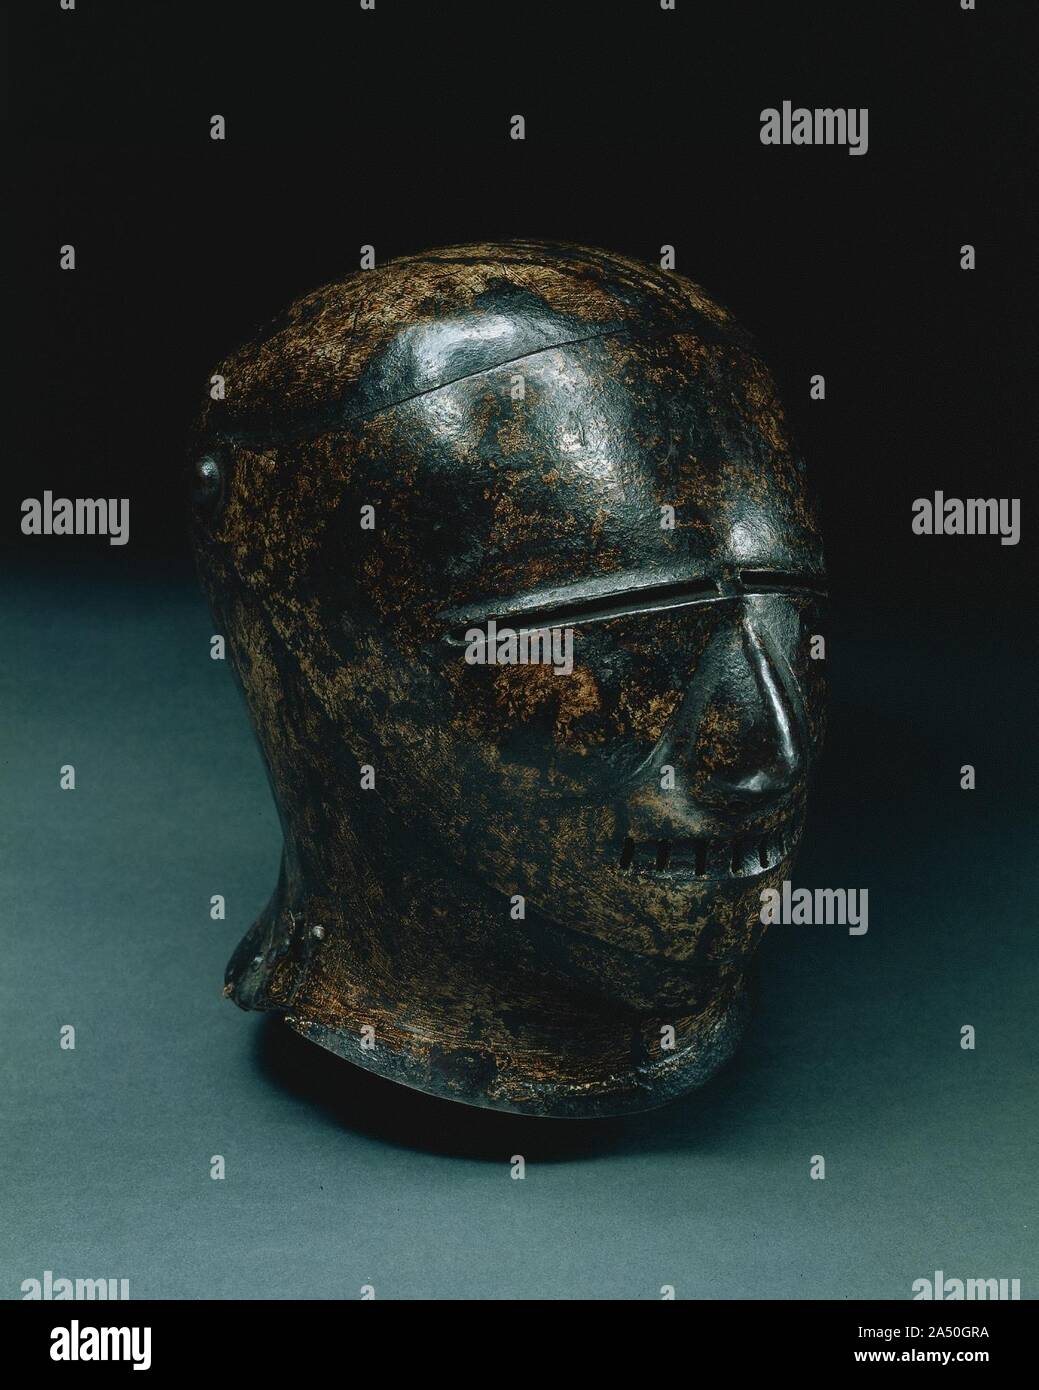 Closed Sallet with Grotesque Face (Schembart visor), c. 1500. A small number of similar painted helmets survive today. All appear to date to the early 1500s. The visors of these helmets are usually in the form of fiercely grimacing human or animal faces, known as Schembart visors after the masked revelers in the Schembartlaufen, the medieval Shrovetide parades. The city of Nuremberg was particularly famous for its Shrovetide parades that were often held in conjunction with a tournament in which the younger members of the city's patrician families, presumably sporting such helmets, participated Stock Photo